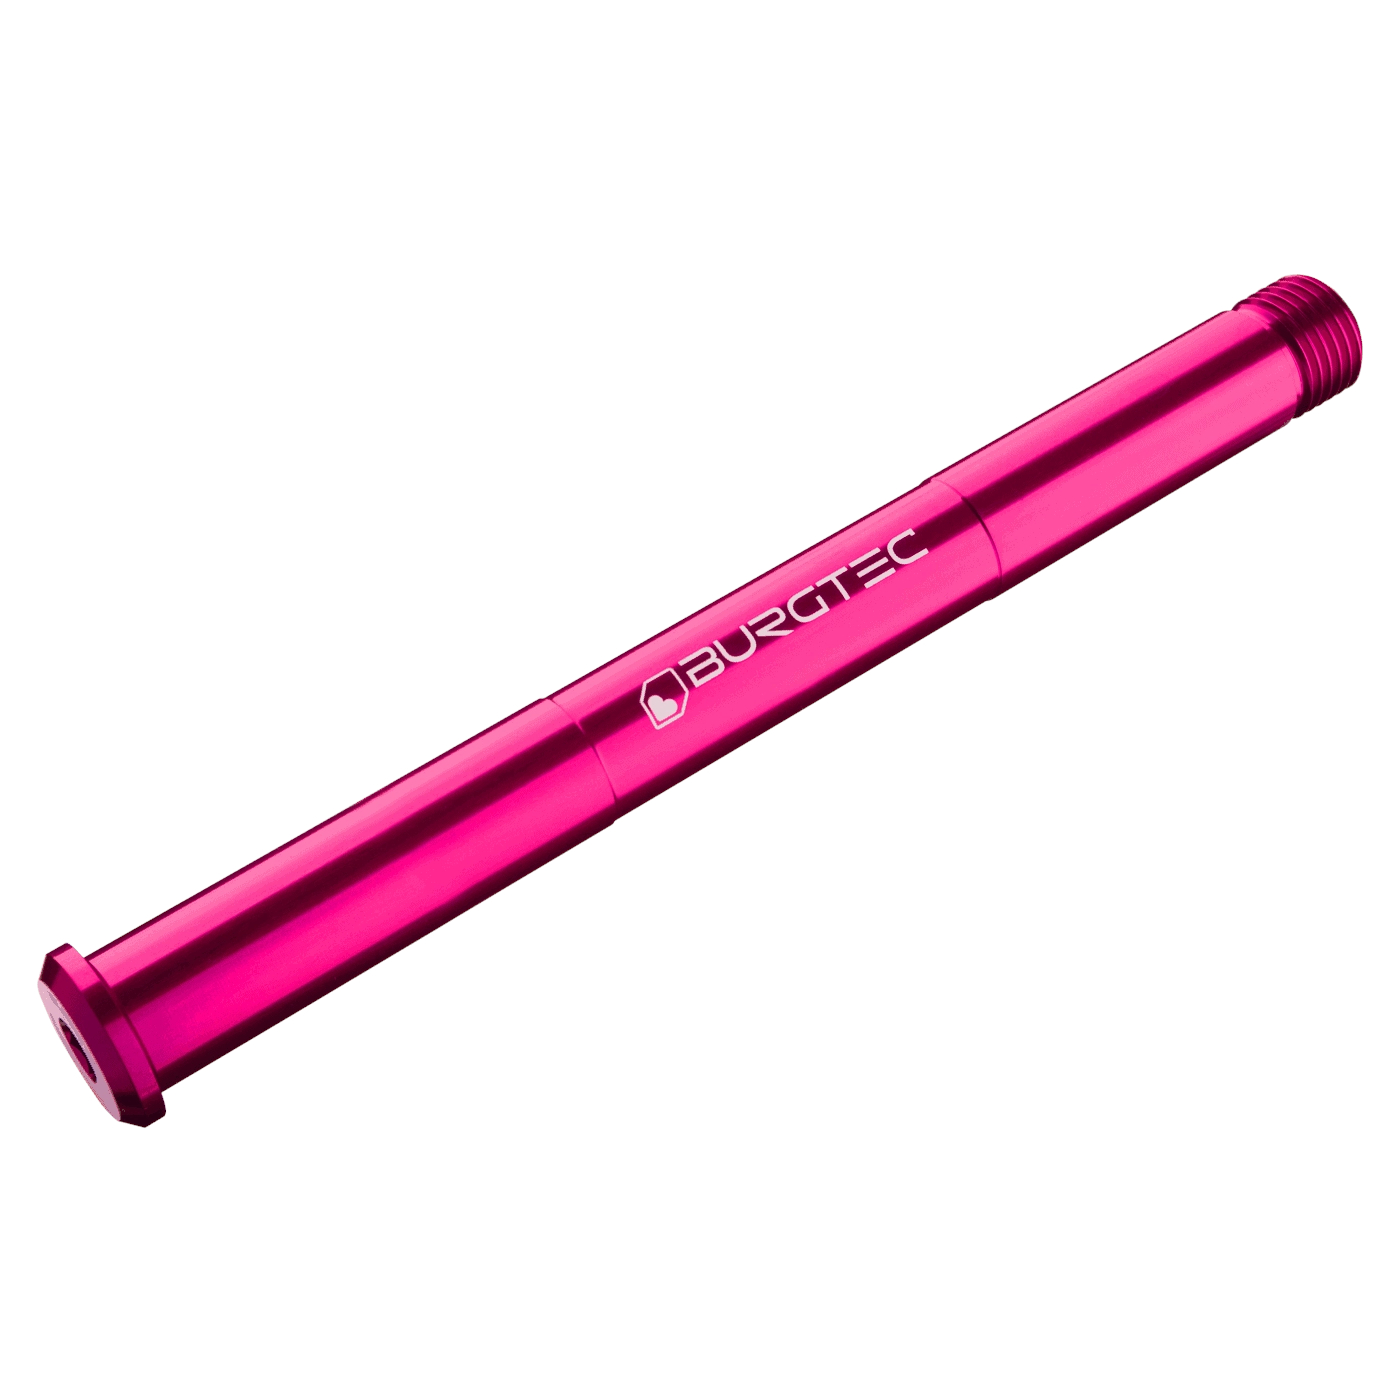 Picture of Burgtec Thru Axle - 15x110mm Boost - for RockShox Forks - Toxic Barbie Pink